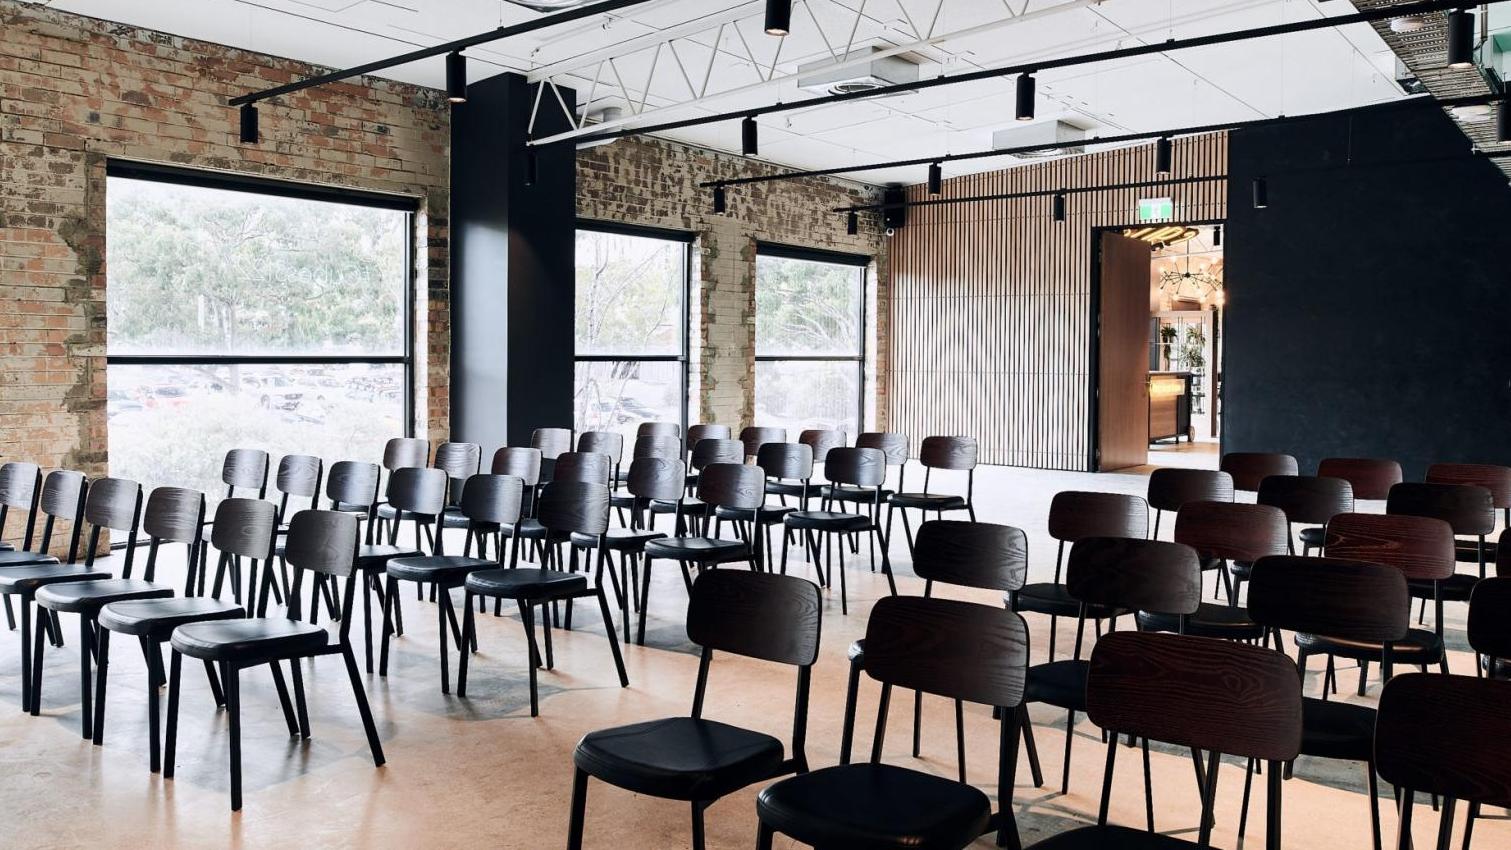 Find your Small Conference Venue in Melbourne